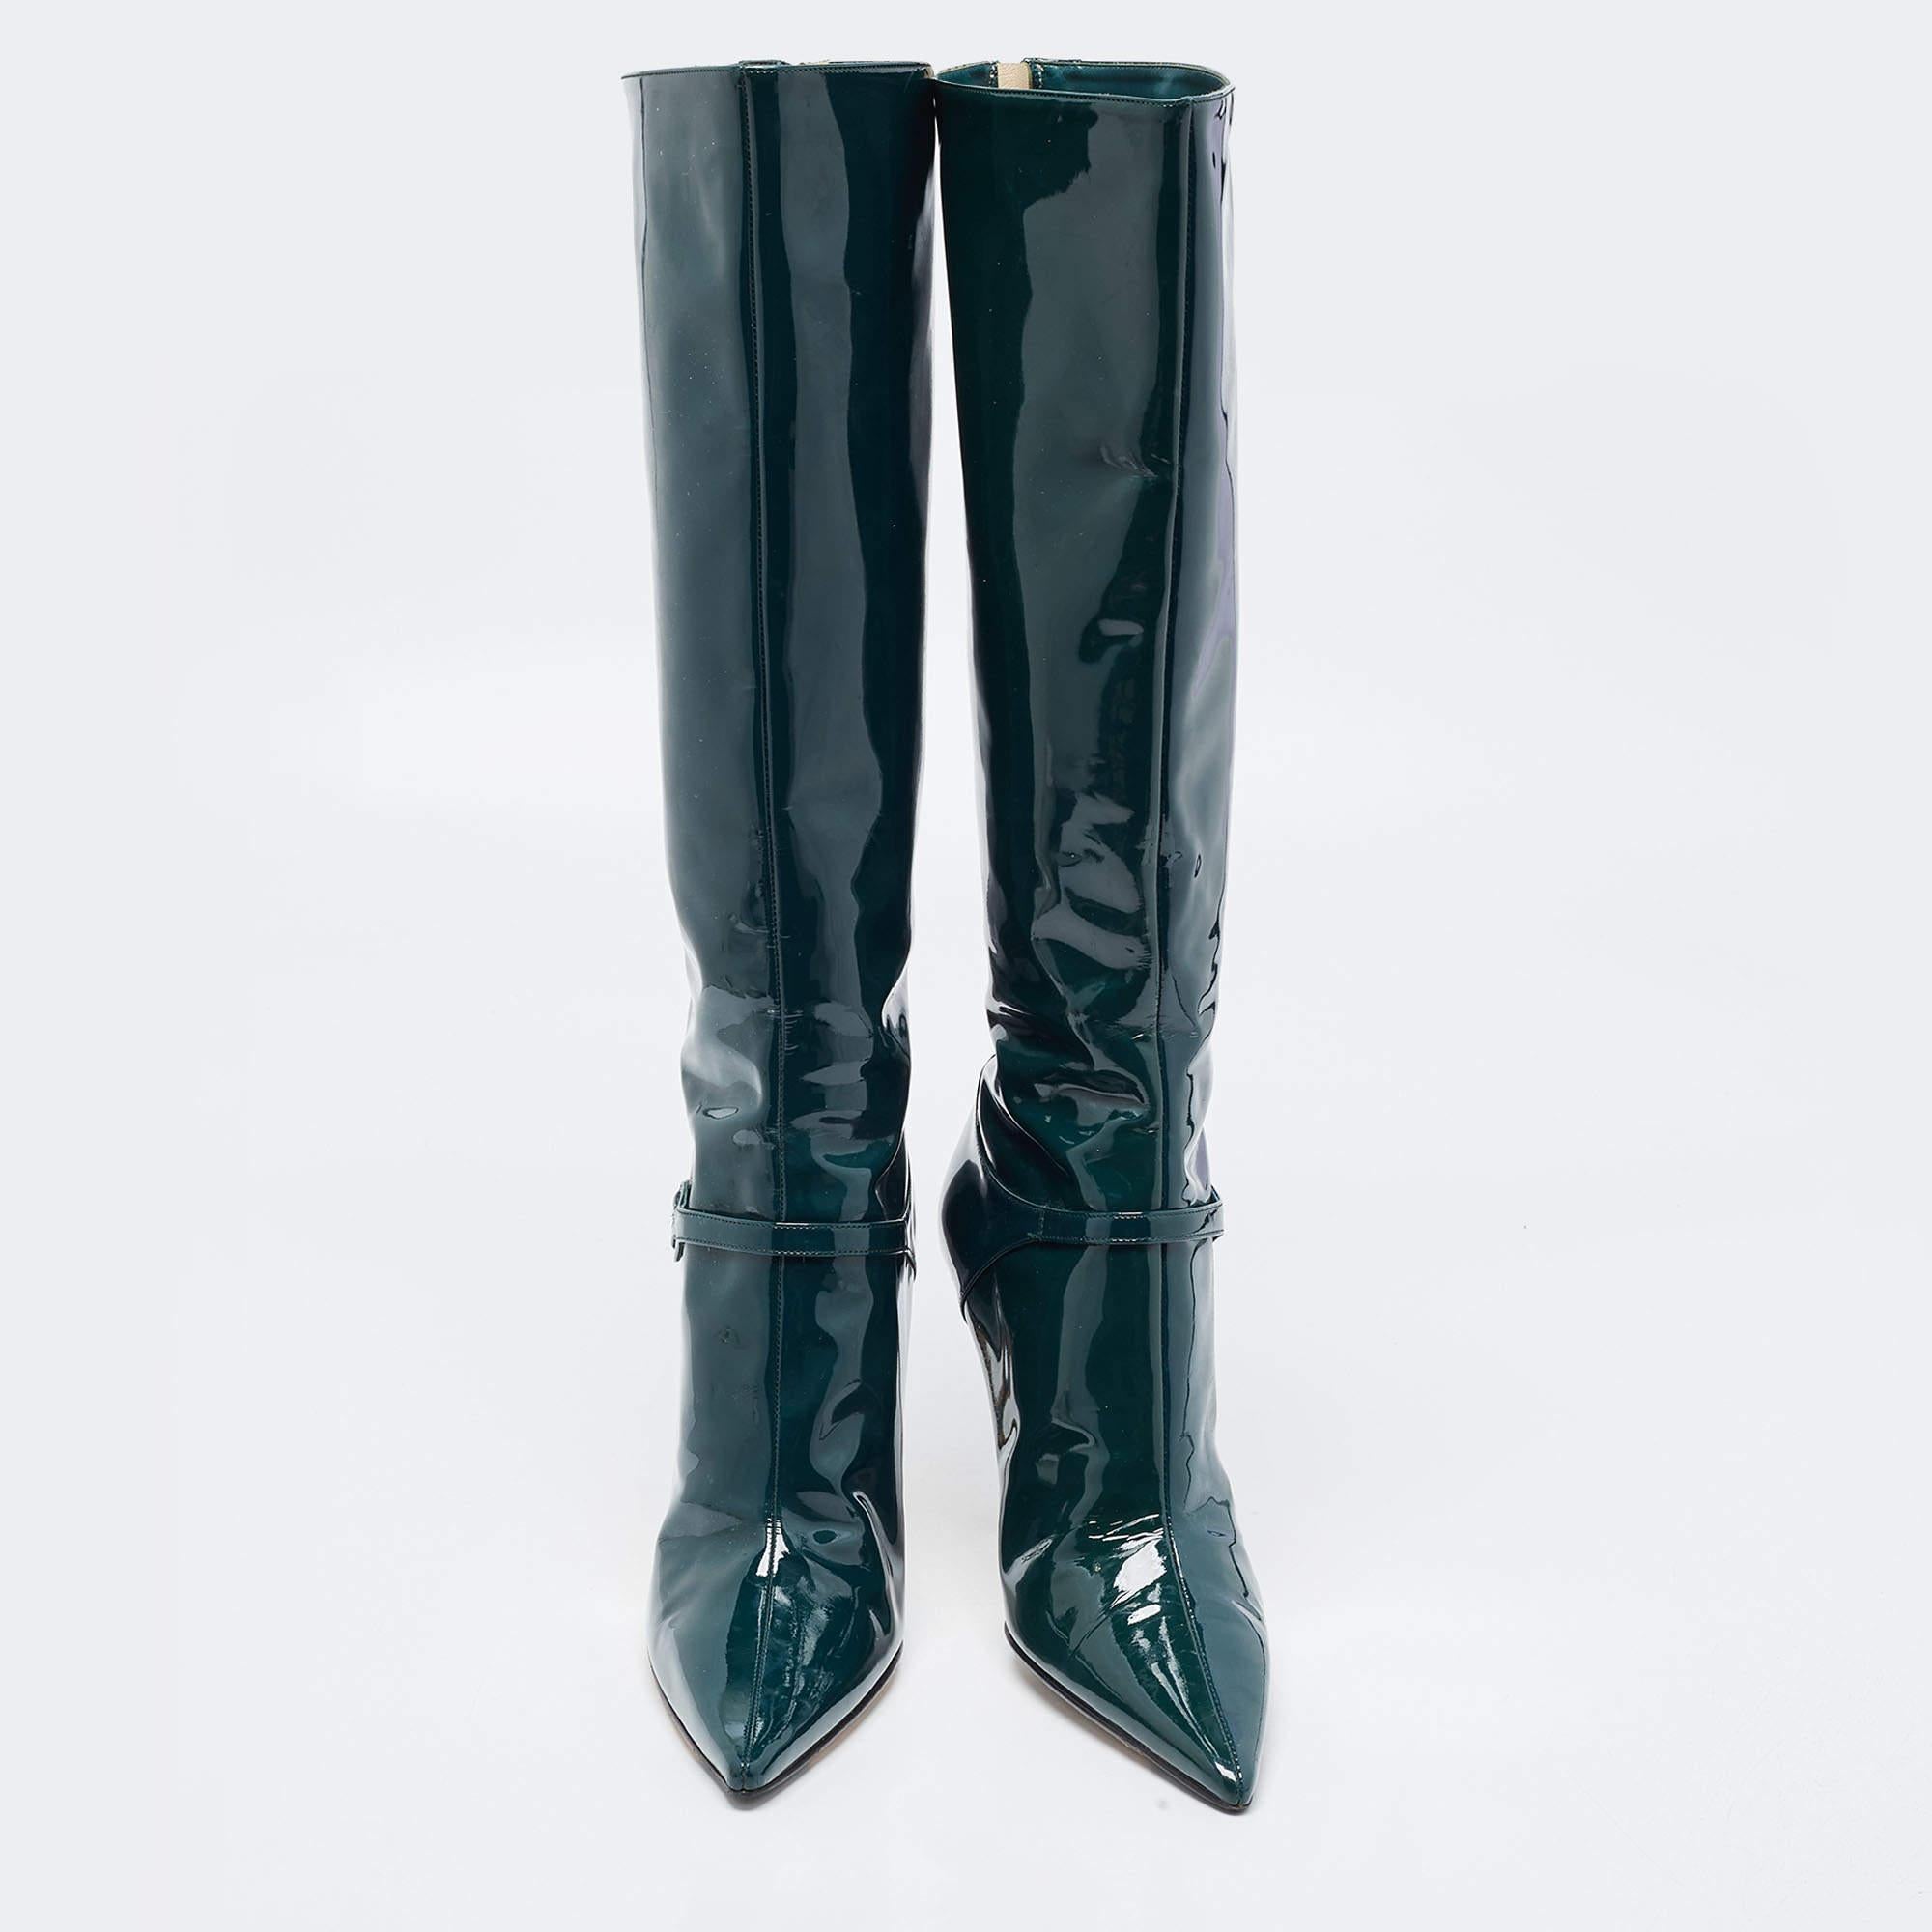 Jimmy Choo Green Patent Leather Calf Length Boots Size 37.5 1